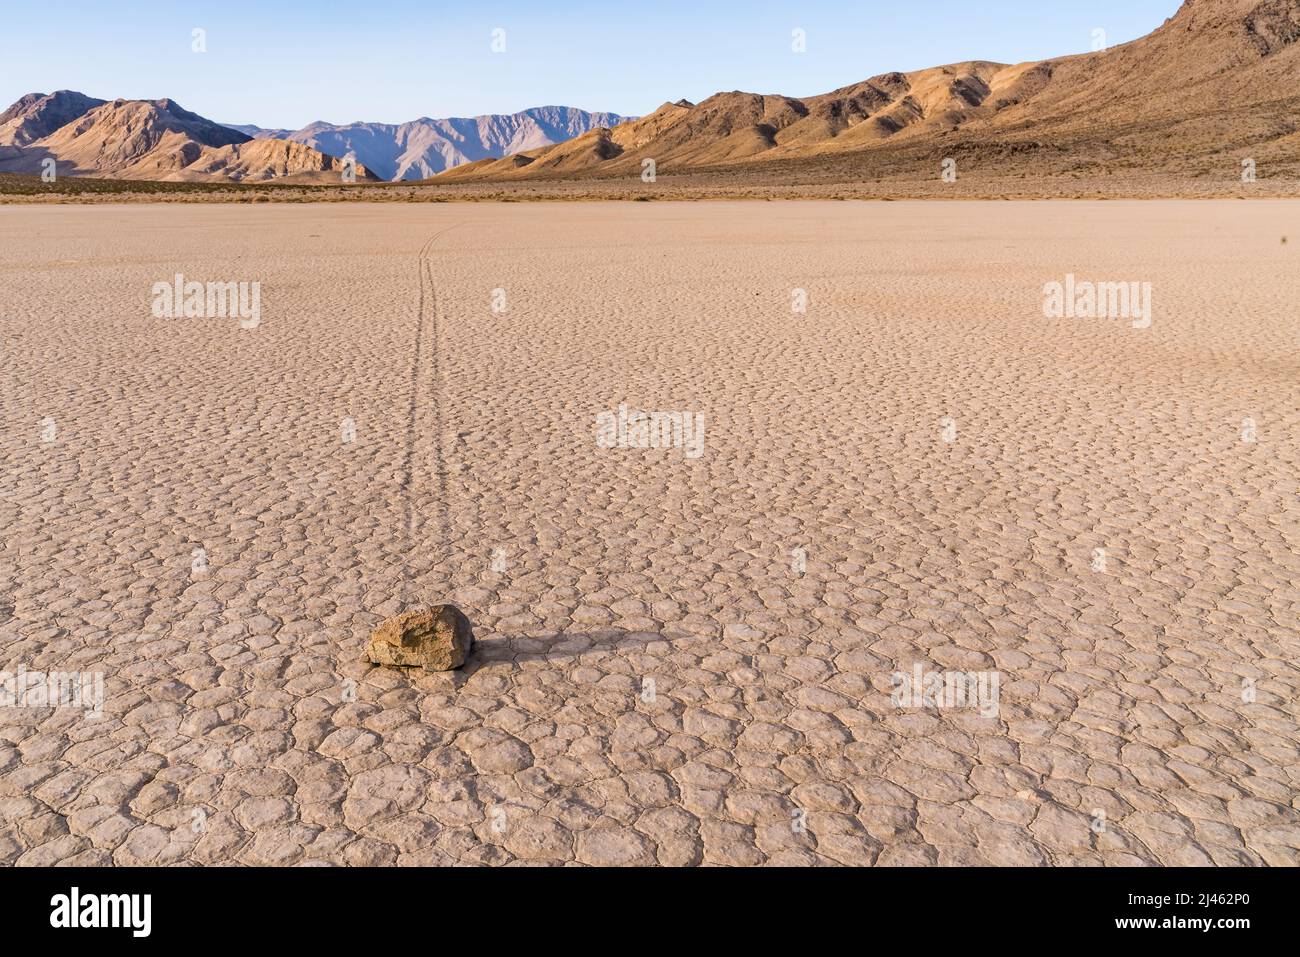 Sailing stones on the Racetrack Playa located in Death Valley National Park, Inyo County, California, U.S. Stock Photo